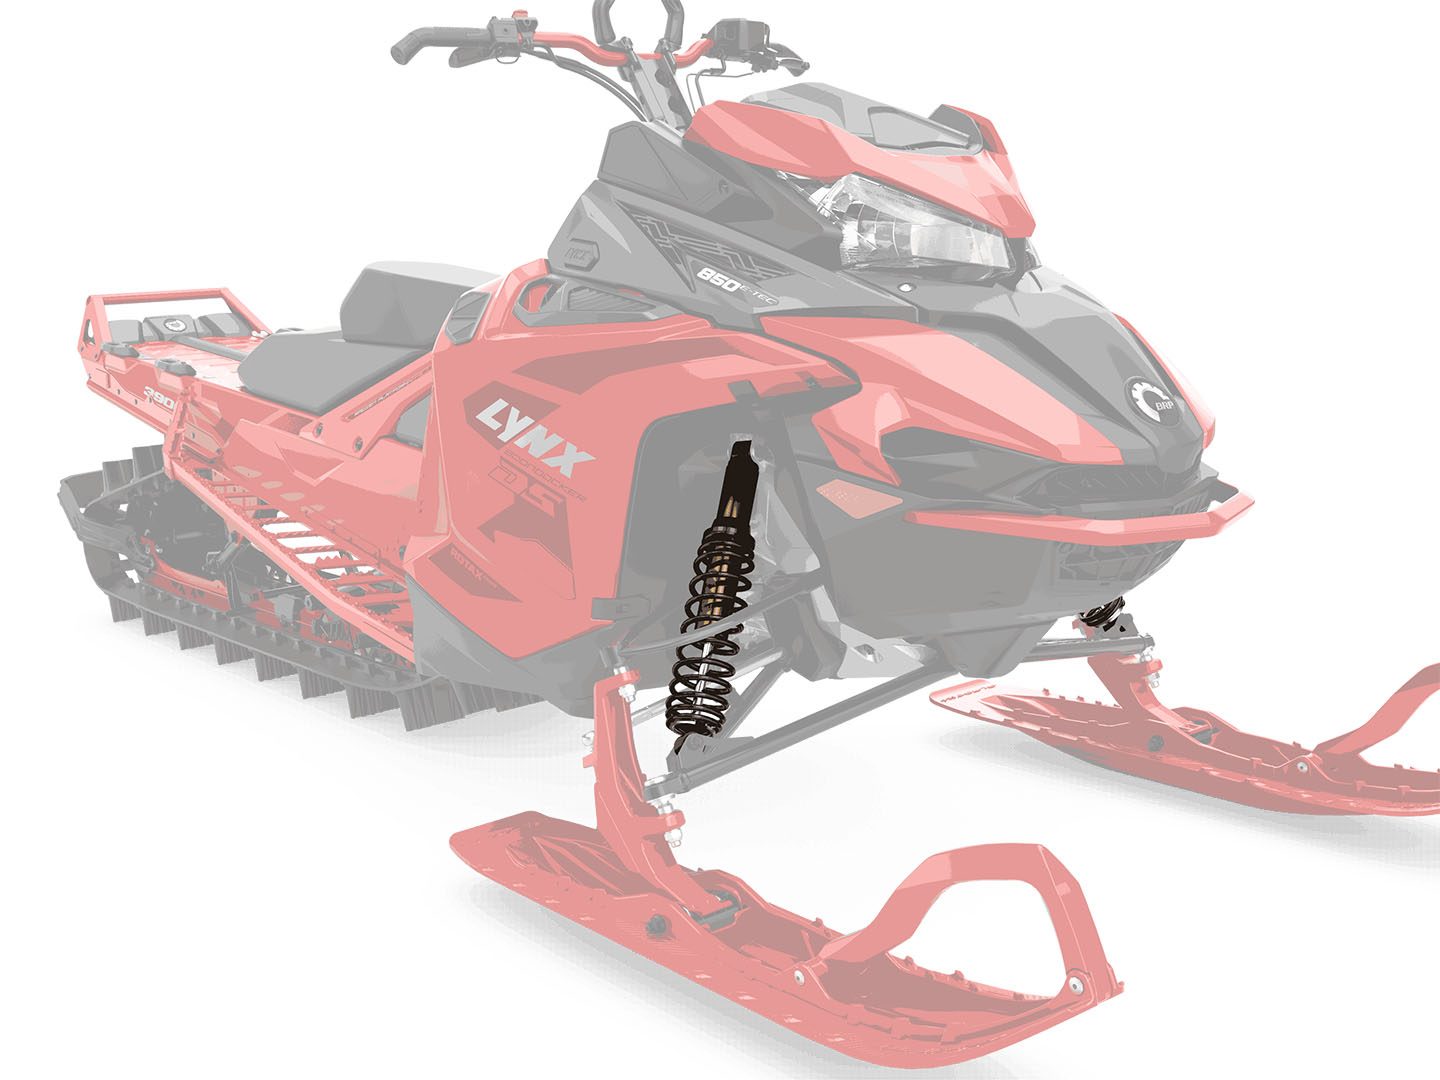 CONTROL IN DEEP SNOW: KYB Kashima shock absorbers - The Kashima coating of KYB shock absorbers on the BoonDocker DS model reduces the internal friction of the shock absorbers, improving the sensitivity of the suspension movement and the handling of the snowmobile. - Photo 11